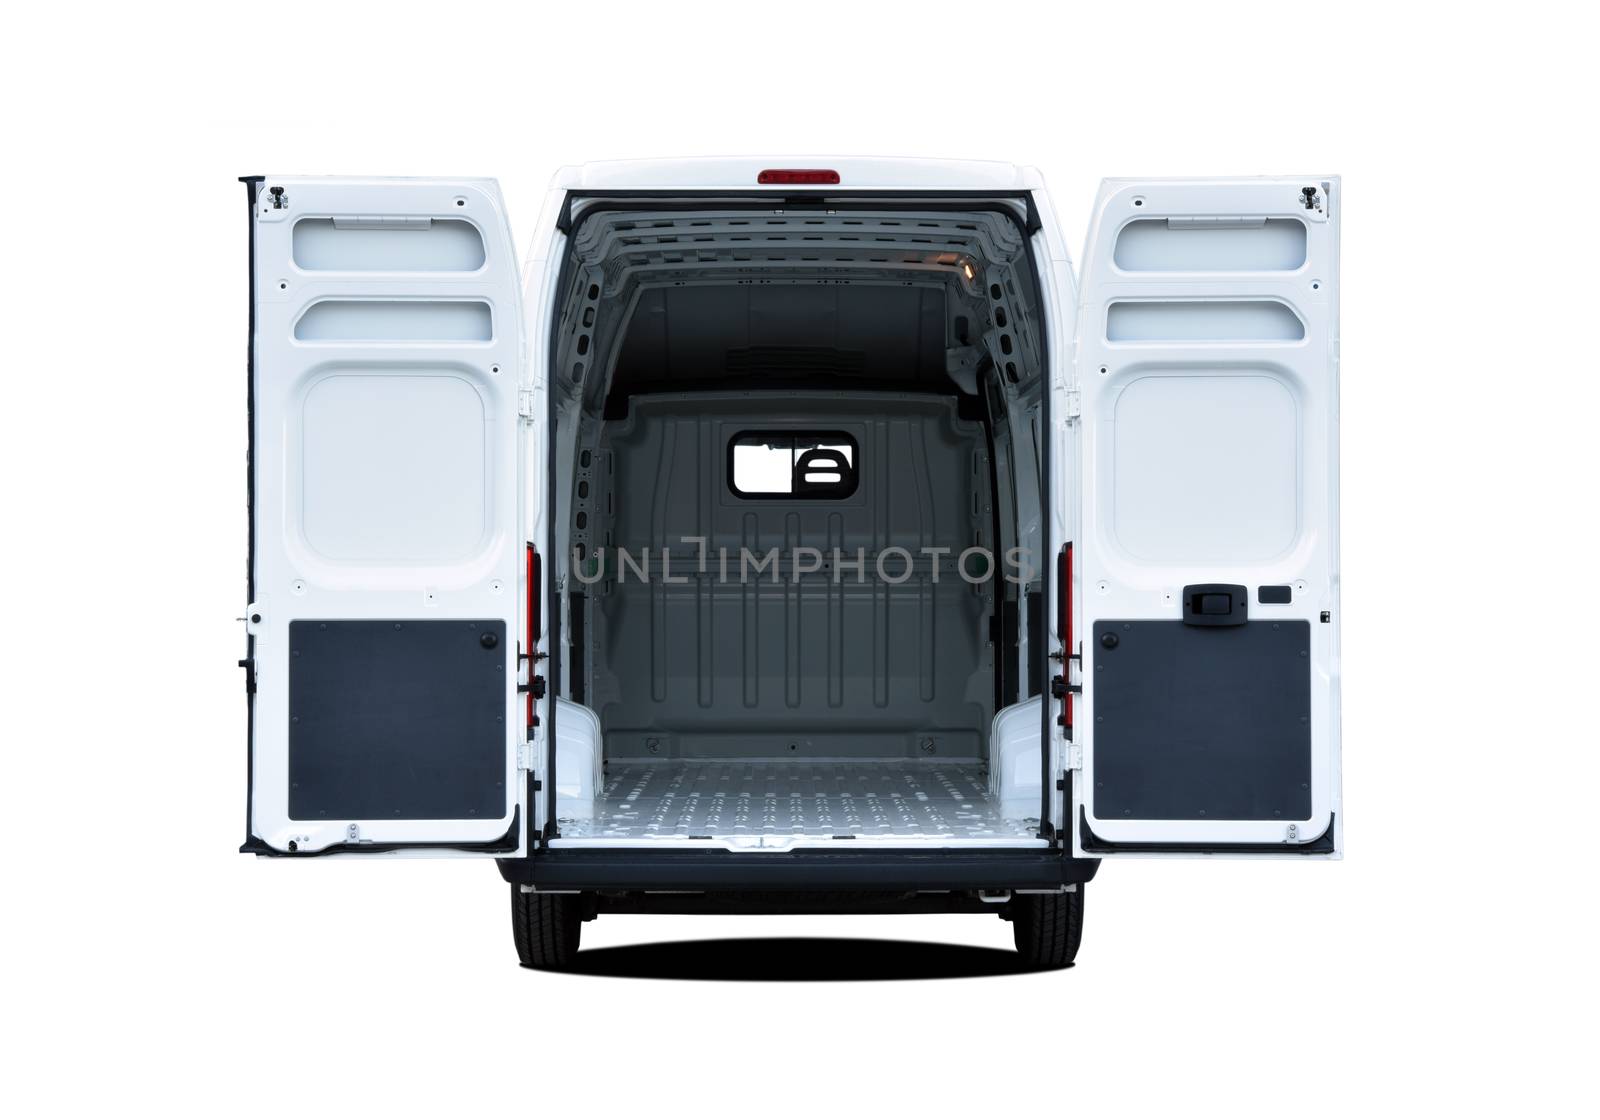 Empty van with rear doors opened, isolated on white background